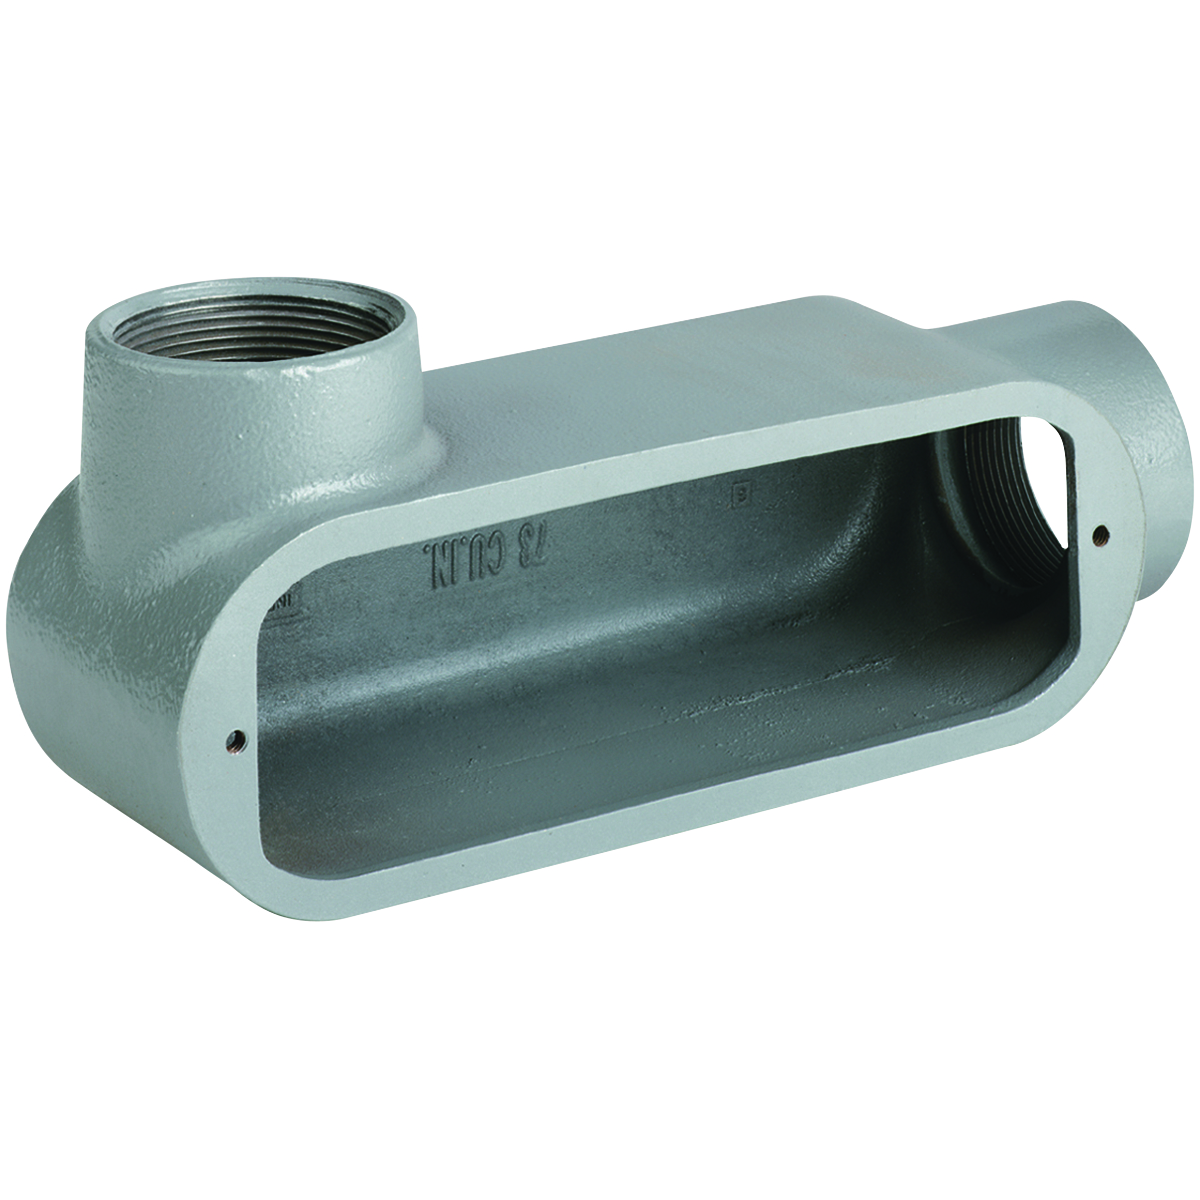 O SERIES/DURALOY 5 SERIES - MALLEABLE IRON CONDUIT BODY - LL TYPE - HUBSIZE 1 INCH - VOLUME 12.0 CUBIC INCHES